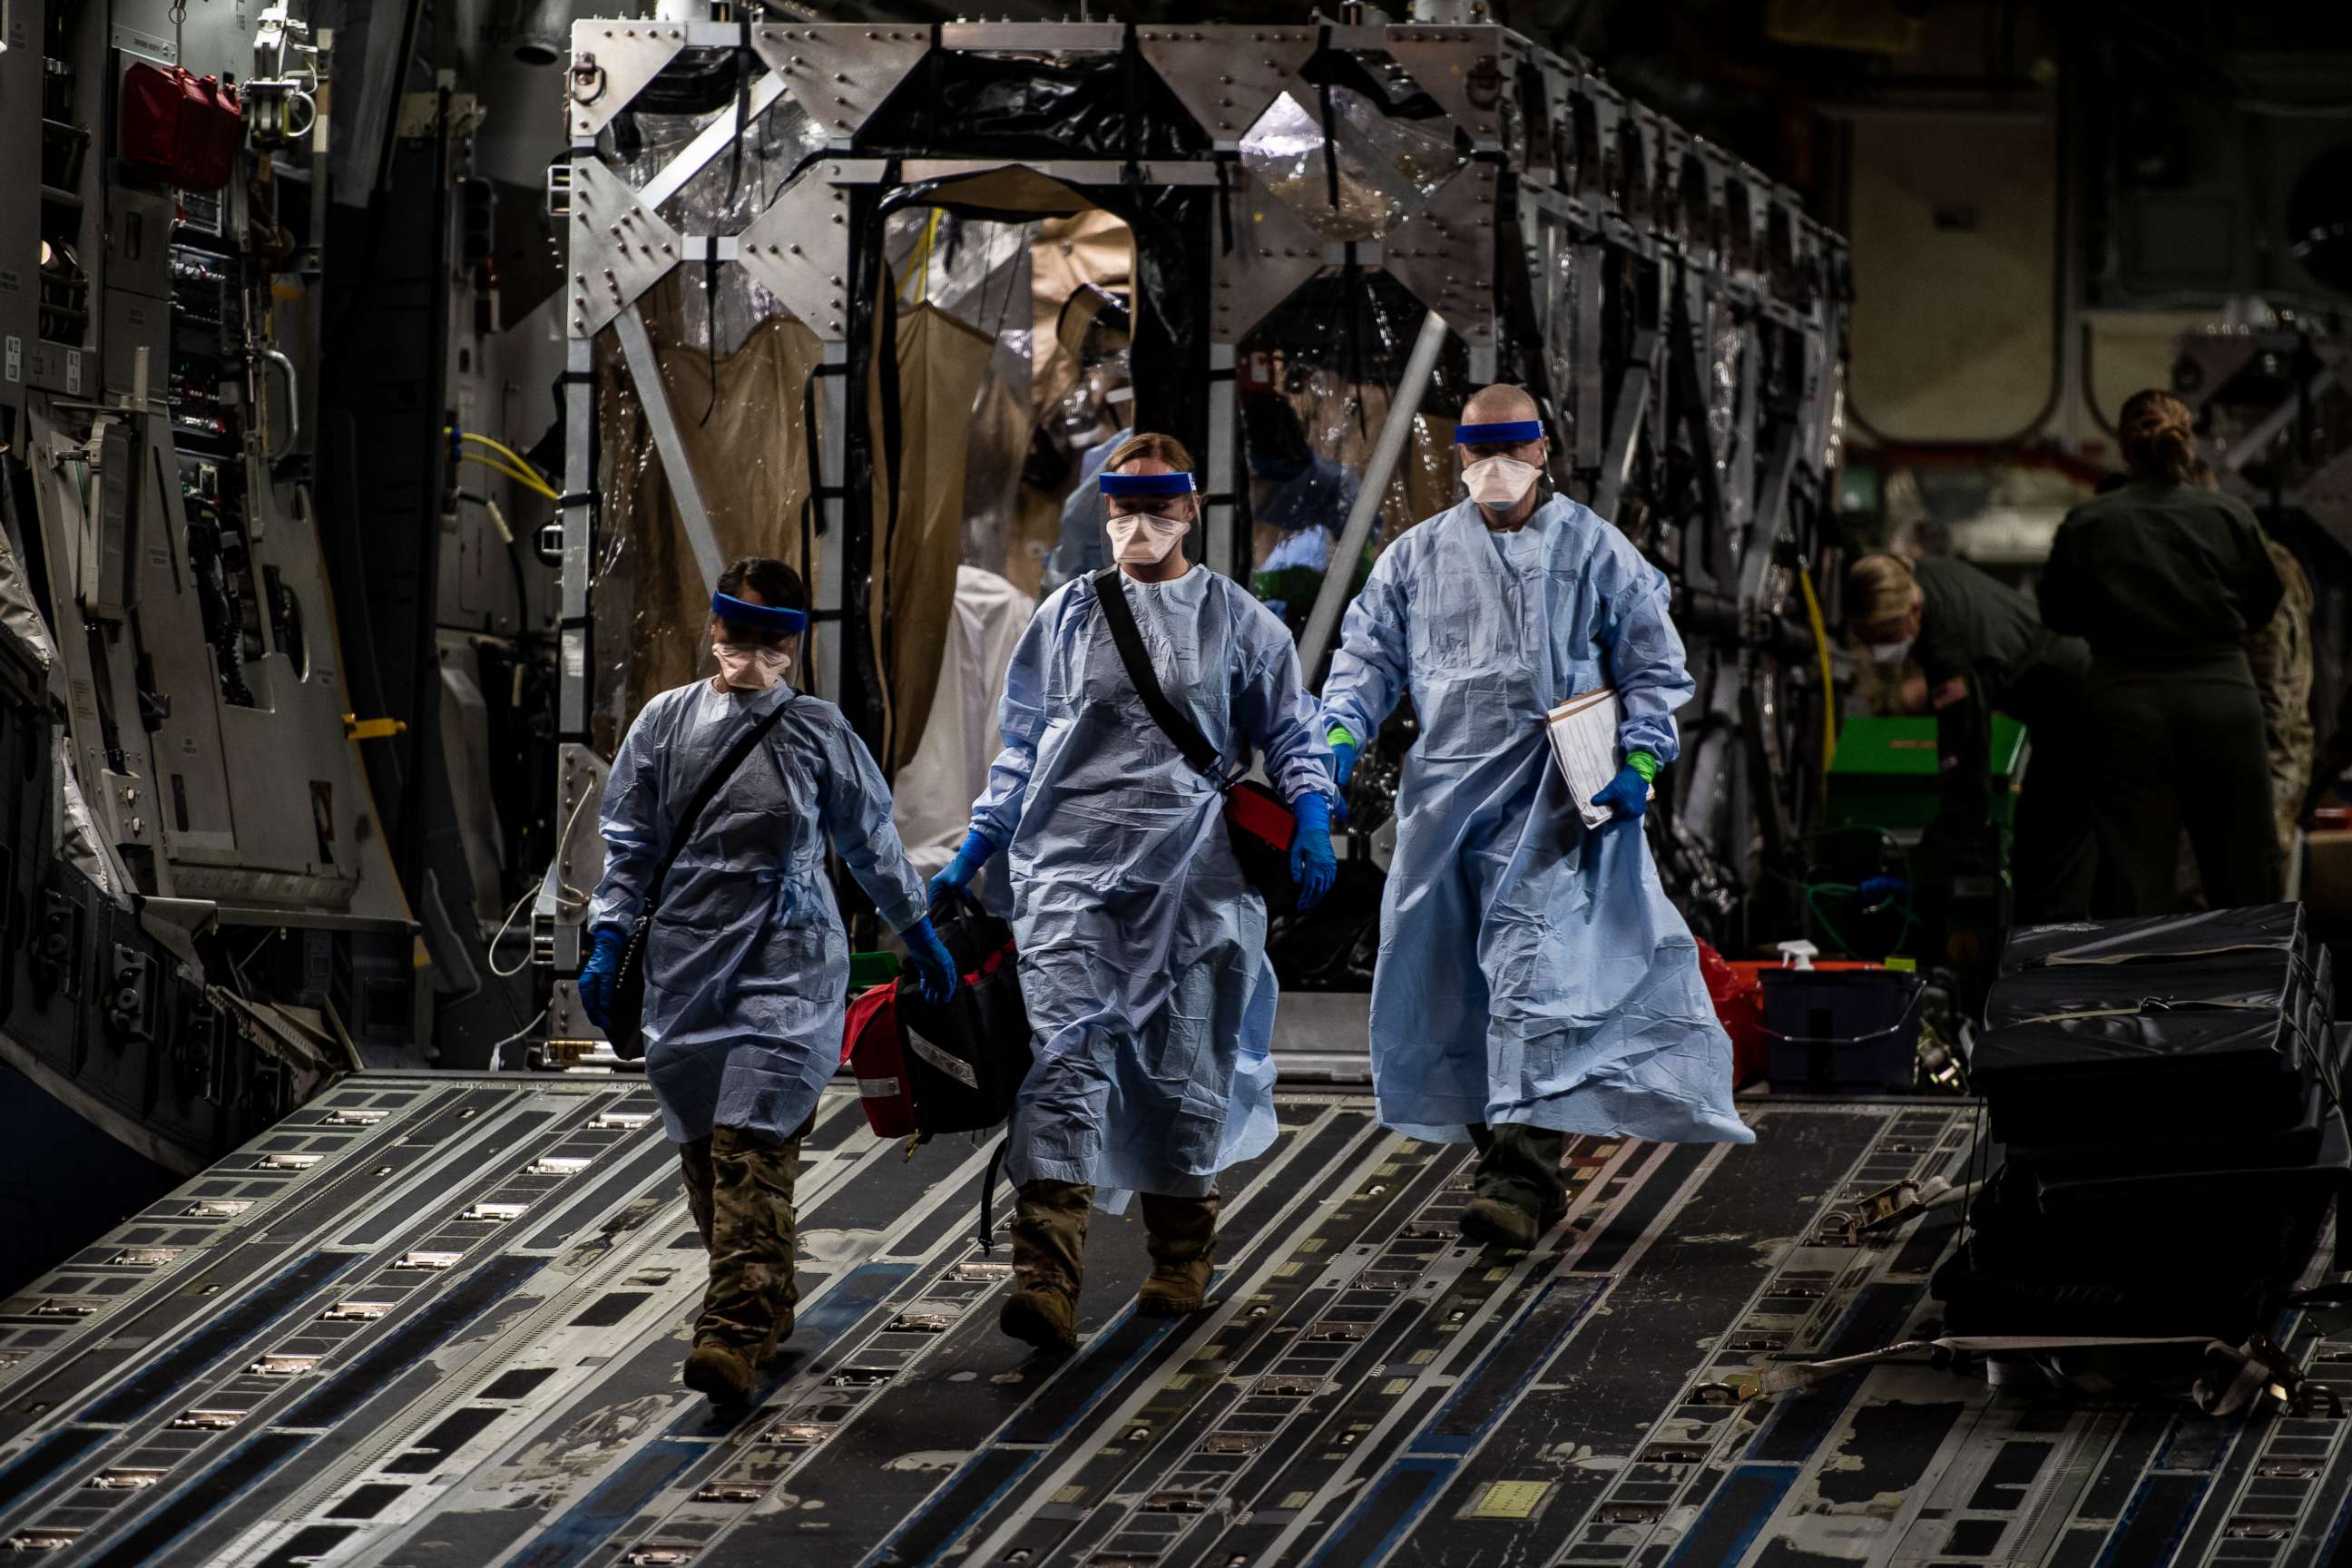 PHOTO: Three U.S. Air Force medical Airmen exit a C-17 Globemaster III aircraft following the first-ever operational use of the Transport Isolation System at Ramstein Air Base, Germany, April 10, 2020.